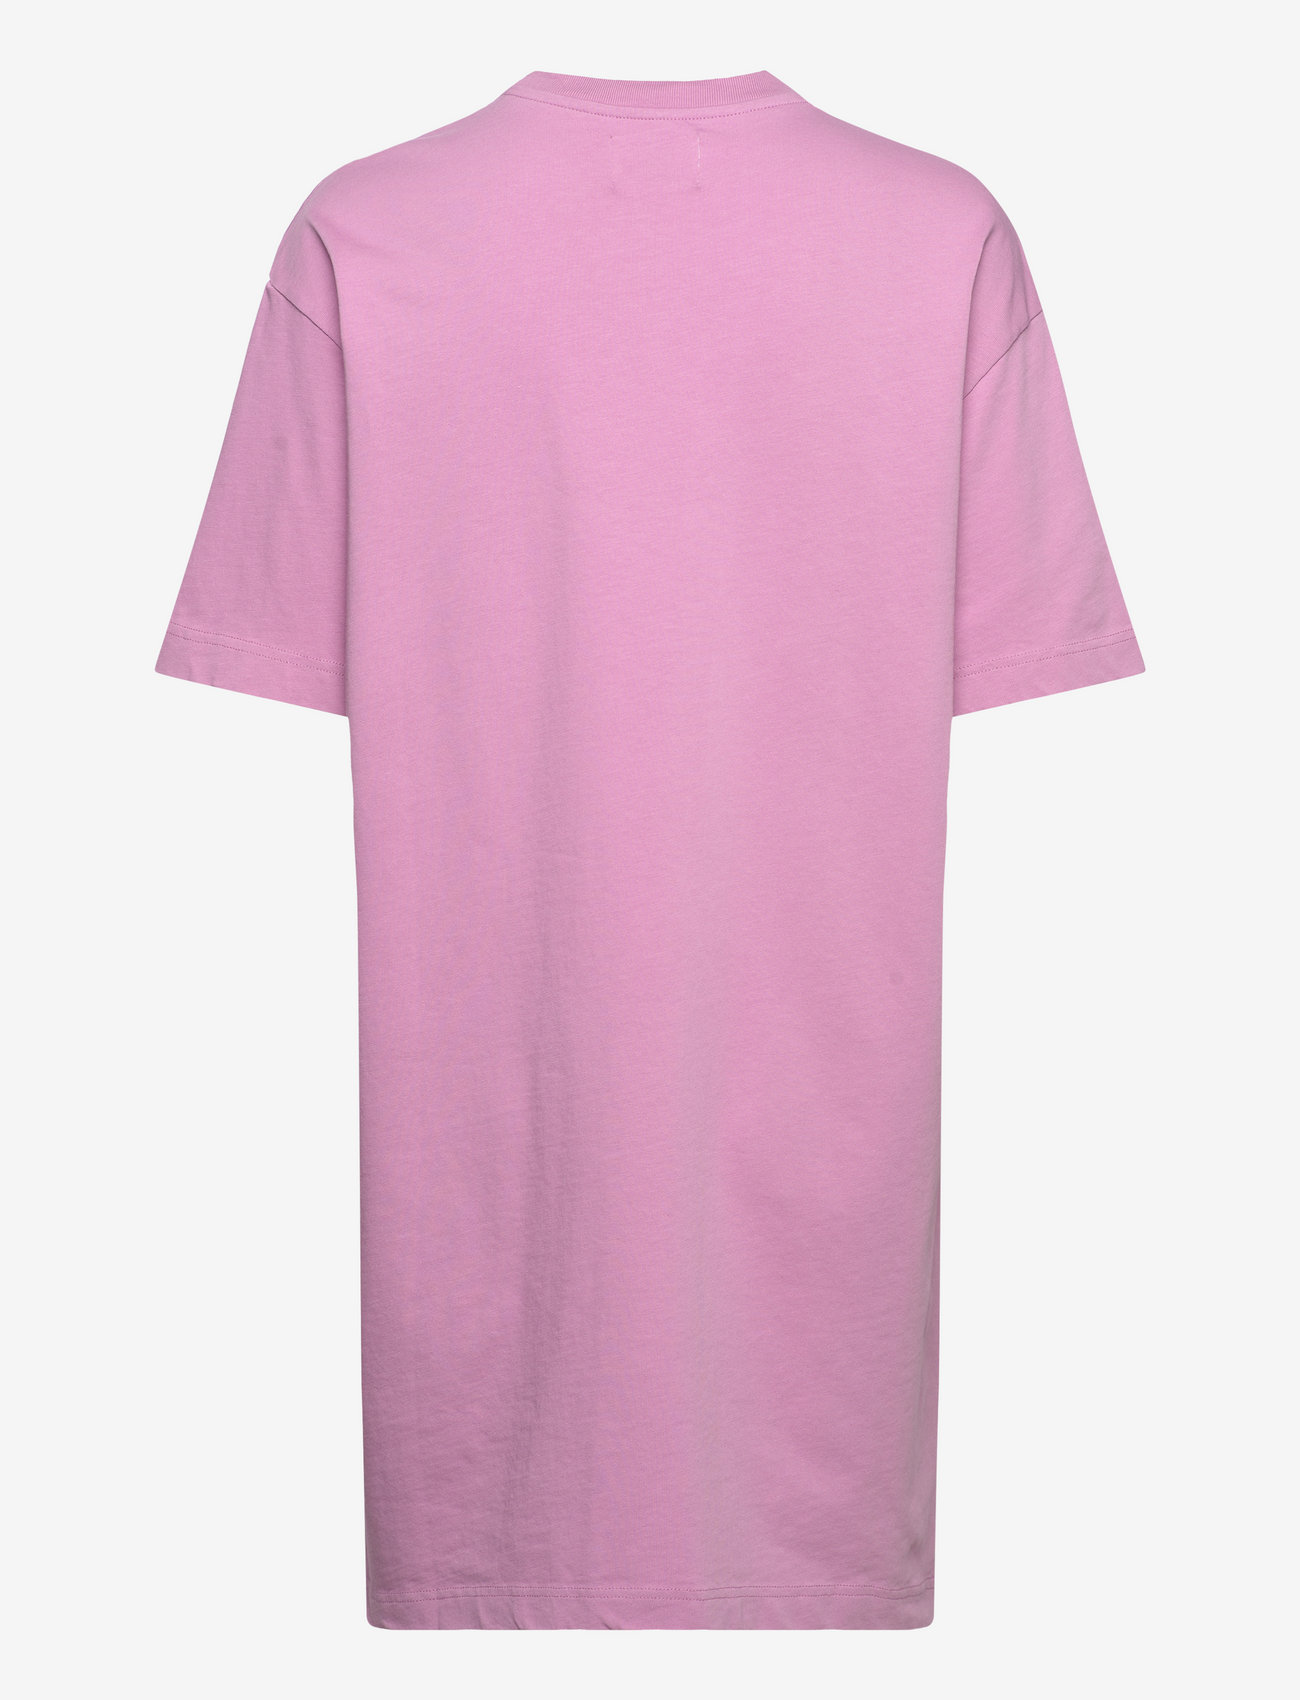 Double A by Wood Wood - Ulla AA dress - t-shirt-kleider - rosy lavender - 1